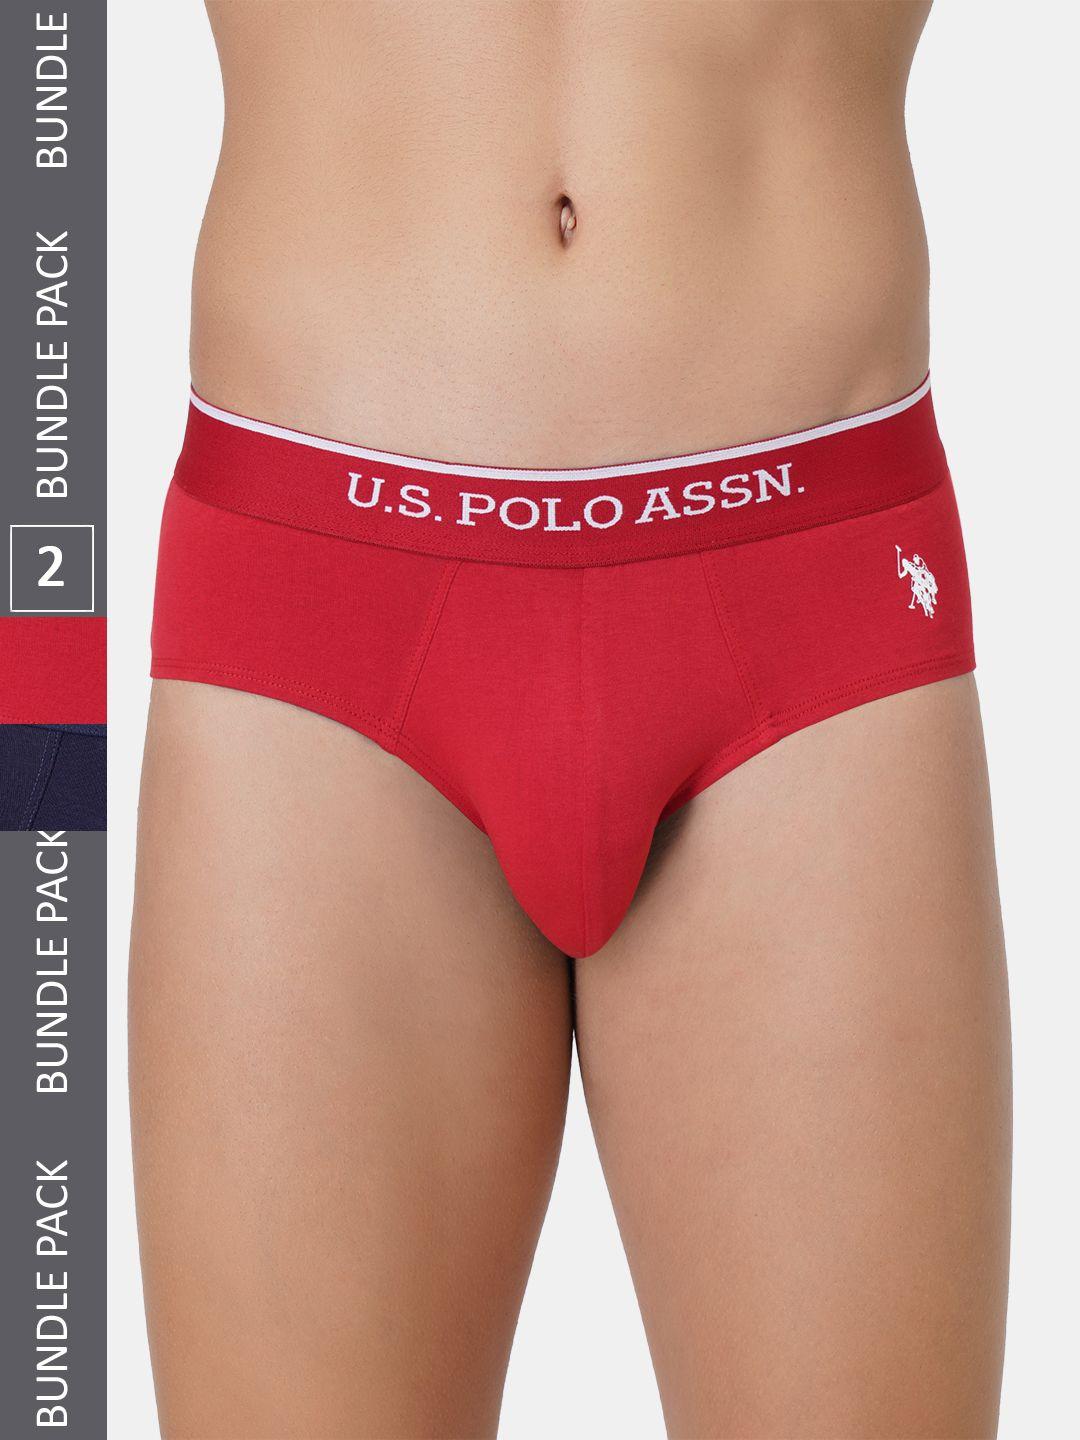 u.s. polo assn. men pack of 2 mid-rise basic brief